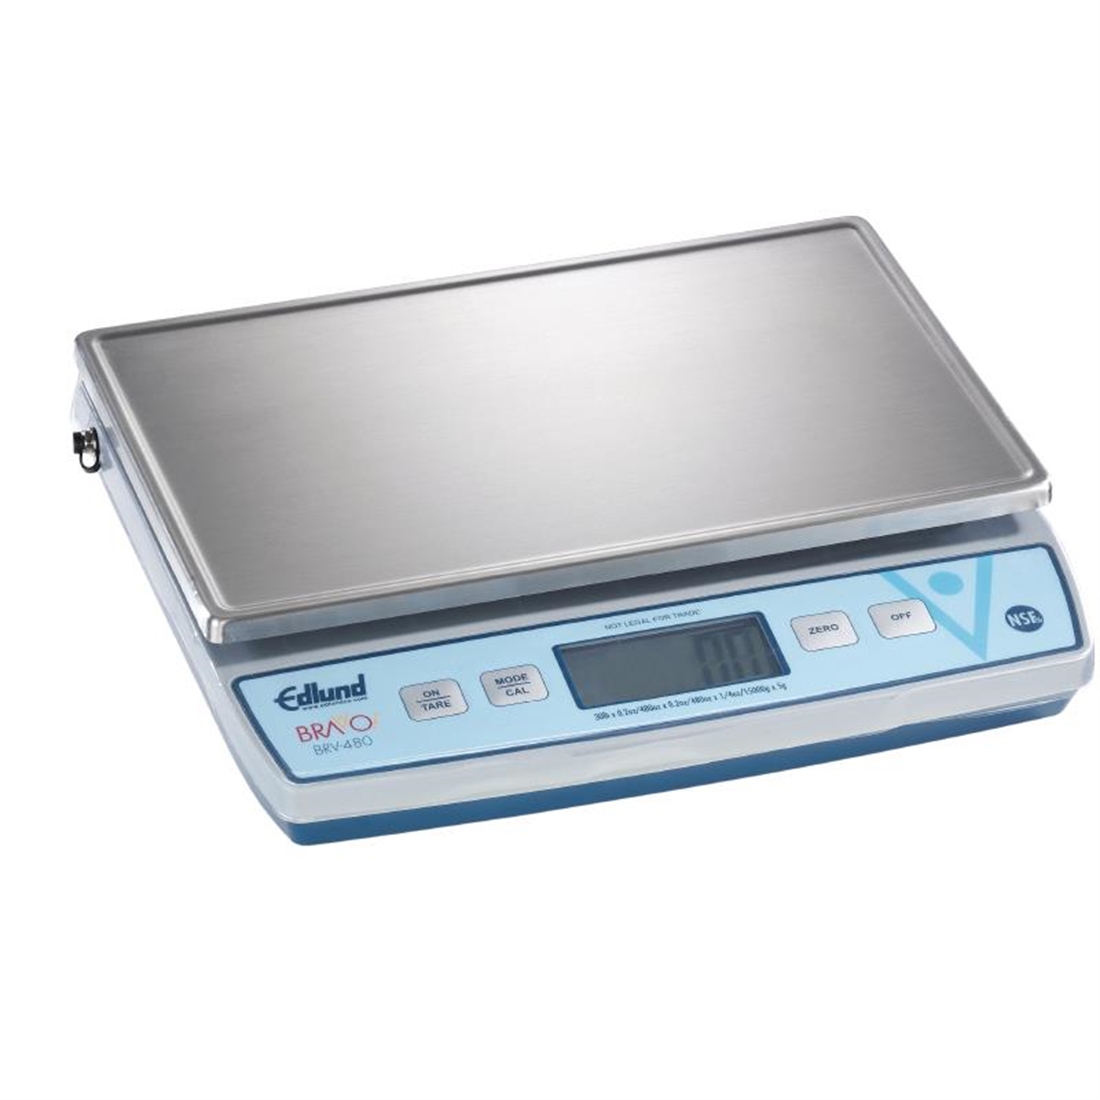 Edlund Bravo 480 Digital Scale with Clearshield Protective Cover 13.6Kg